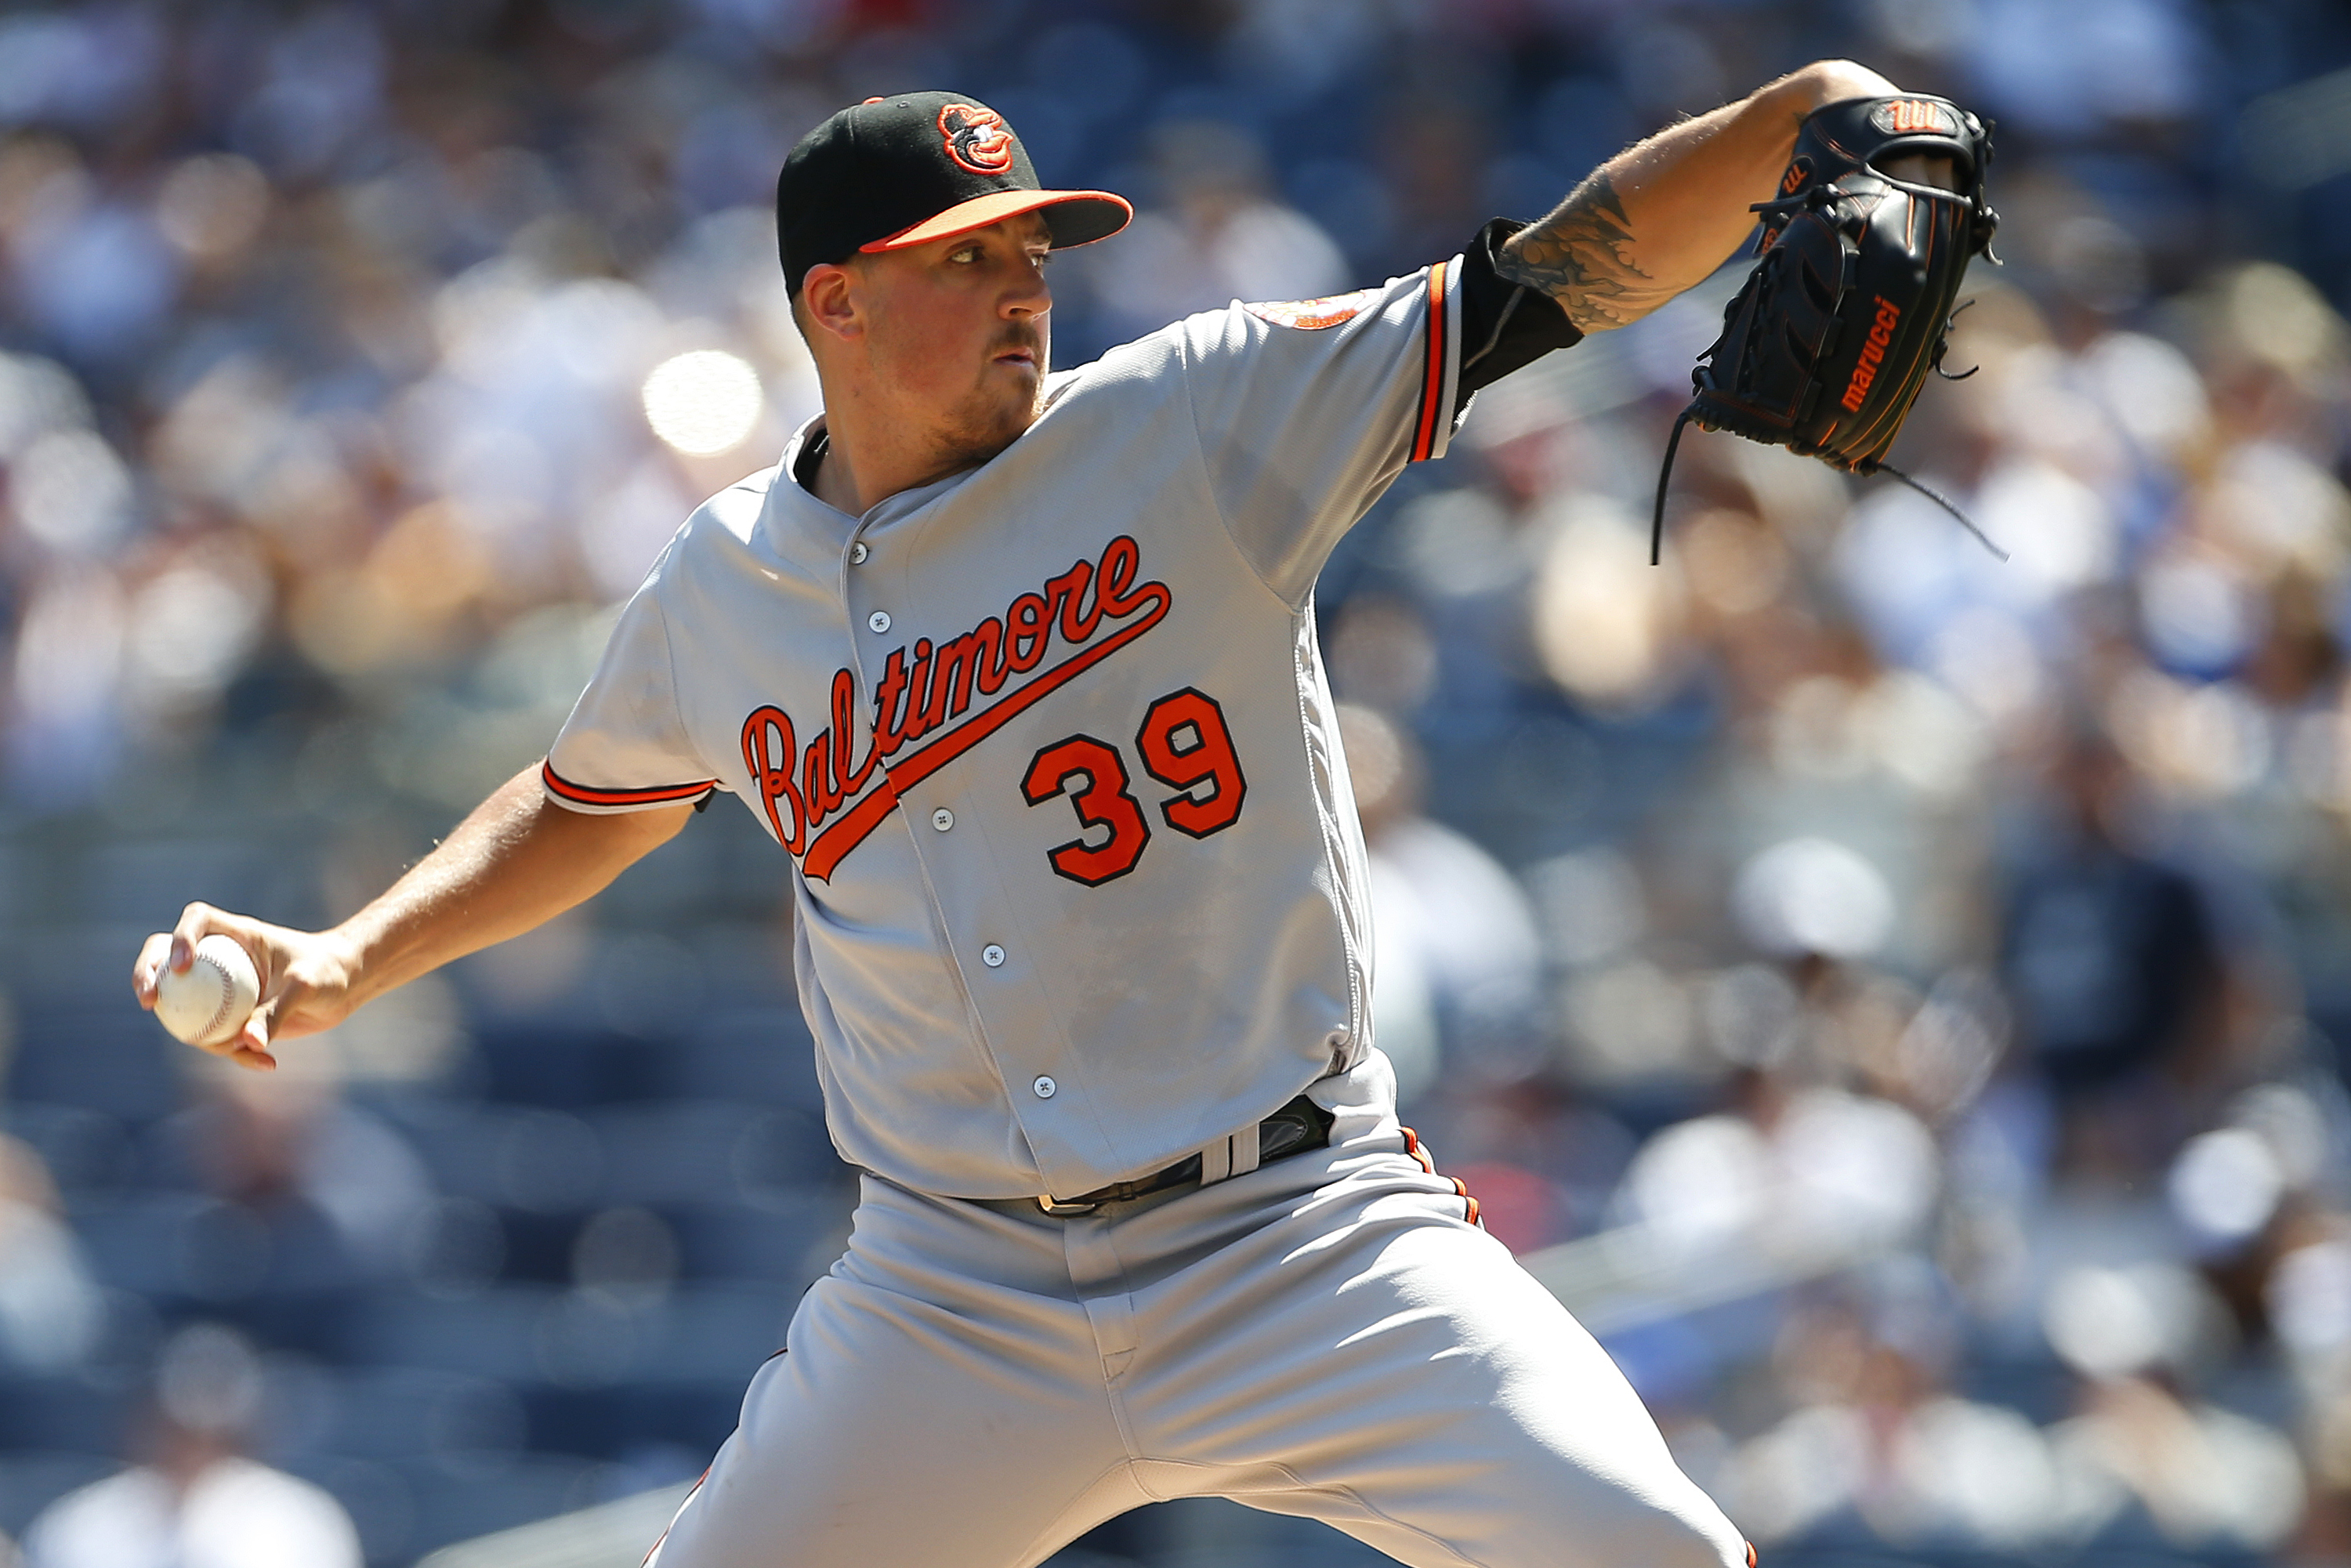 New-look Orioles pitcher Kevin Gausman pitches three scoreless